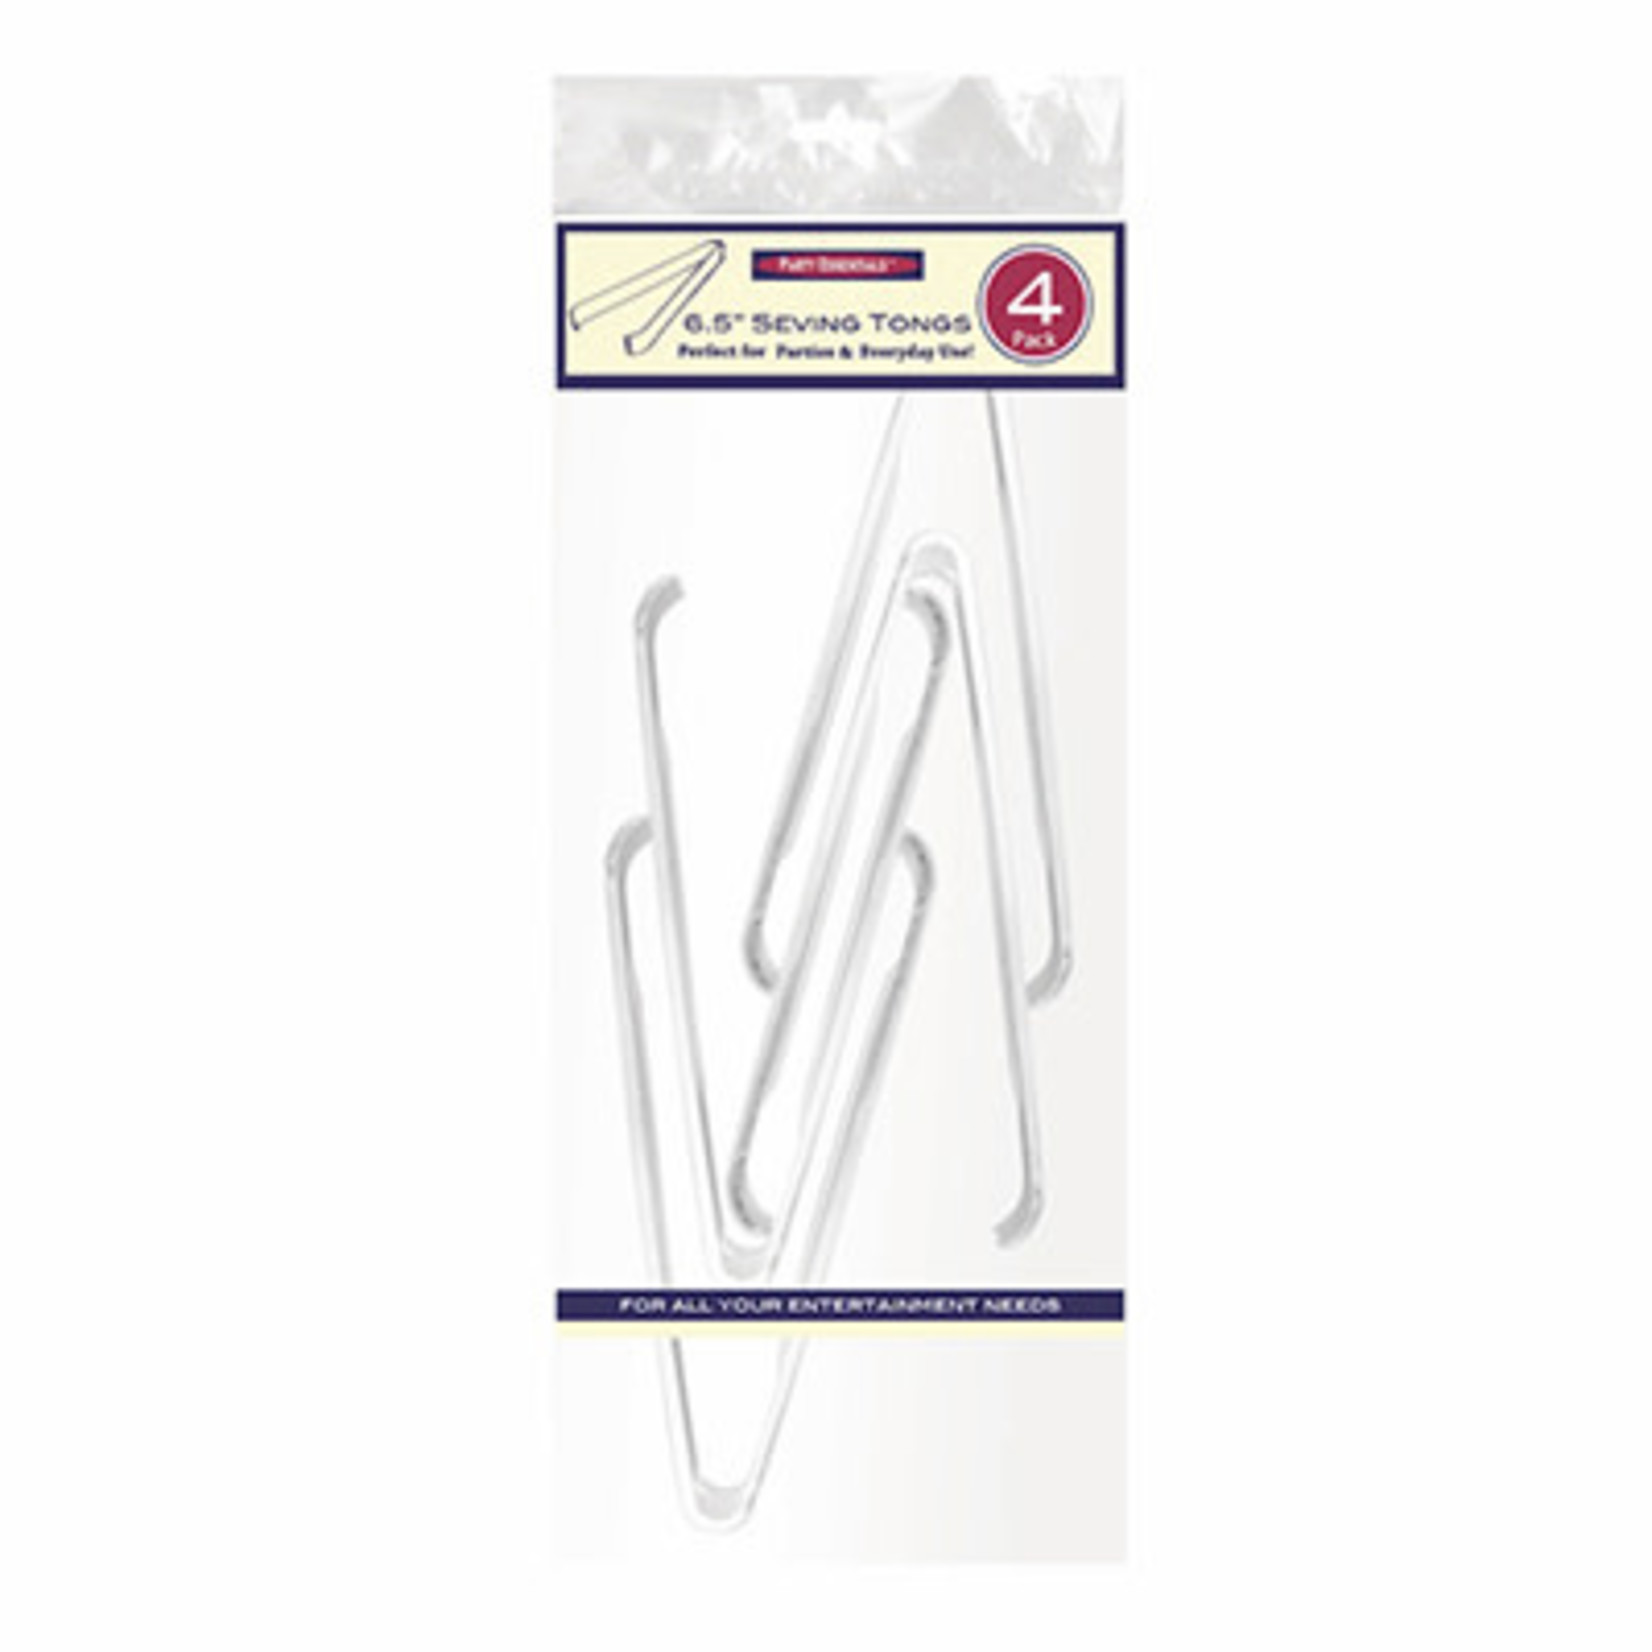 northwest 6.5" Clear Plastic Serving Tongs - 4ct.